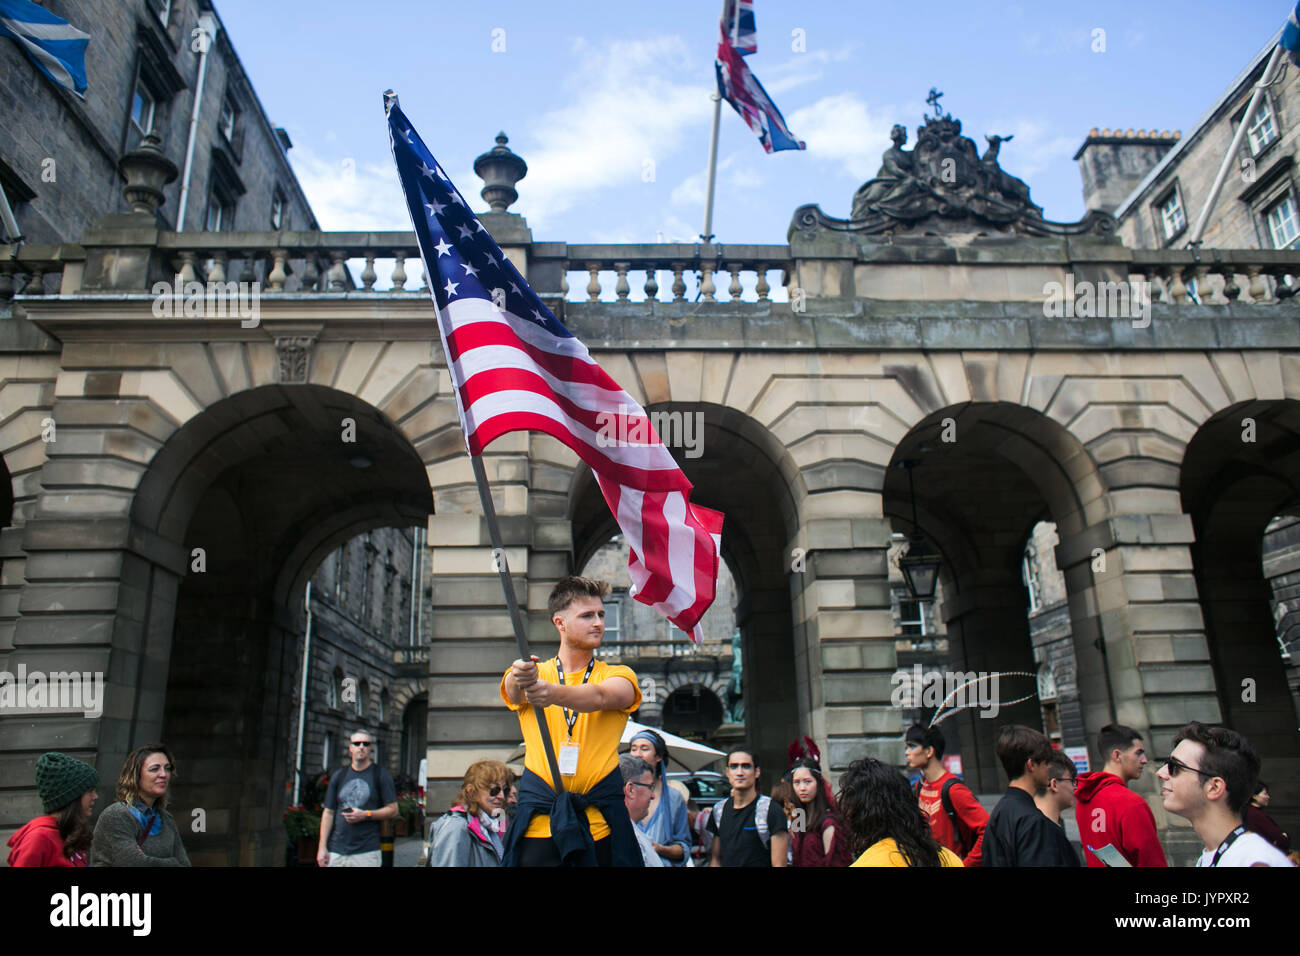 Performers advertise their next show in the Royal Mile with the American flag. Edinburgh international and fringe festival in full swing. Stock Photo